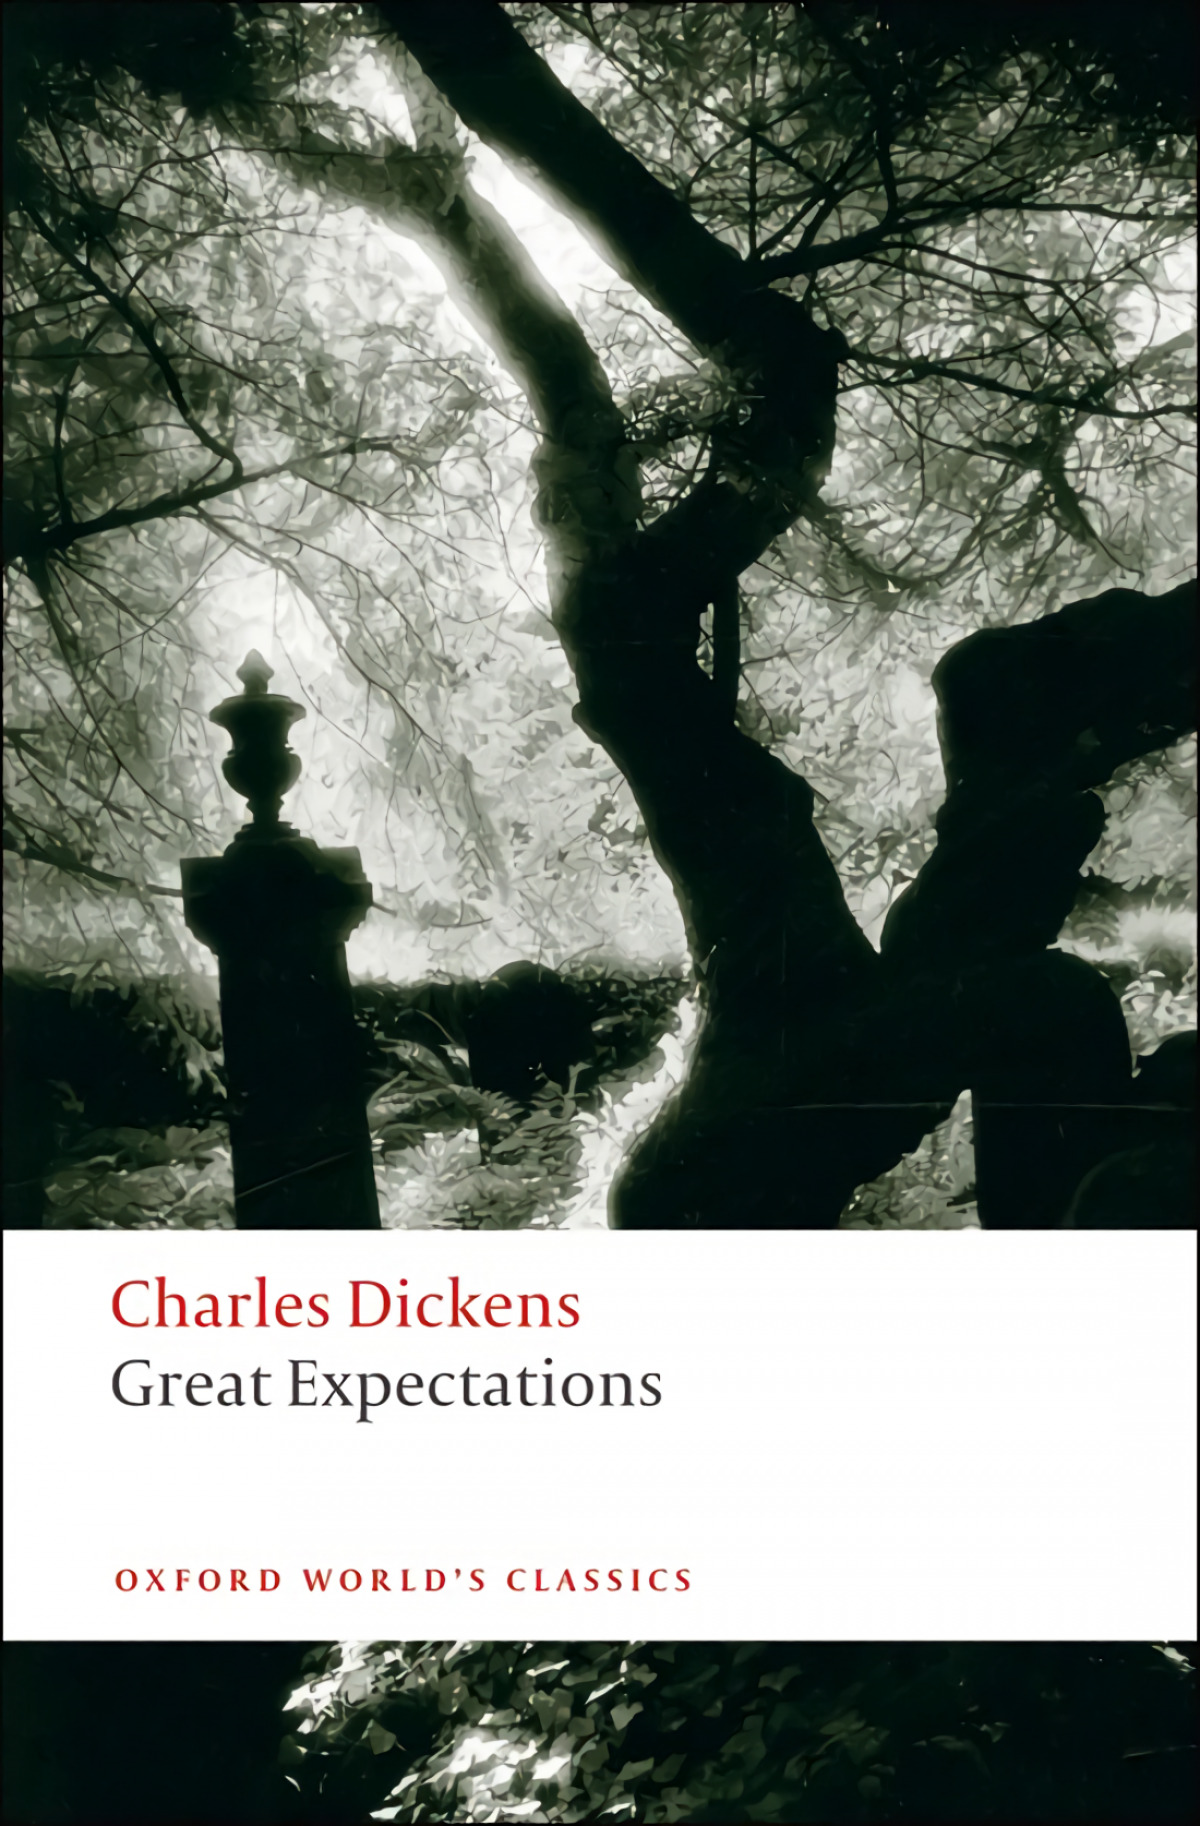 Oxford Worlds Classics: Great Expectations - Dickens, Charles